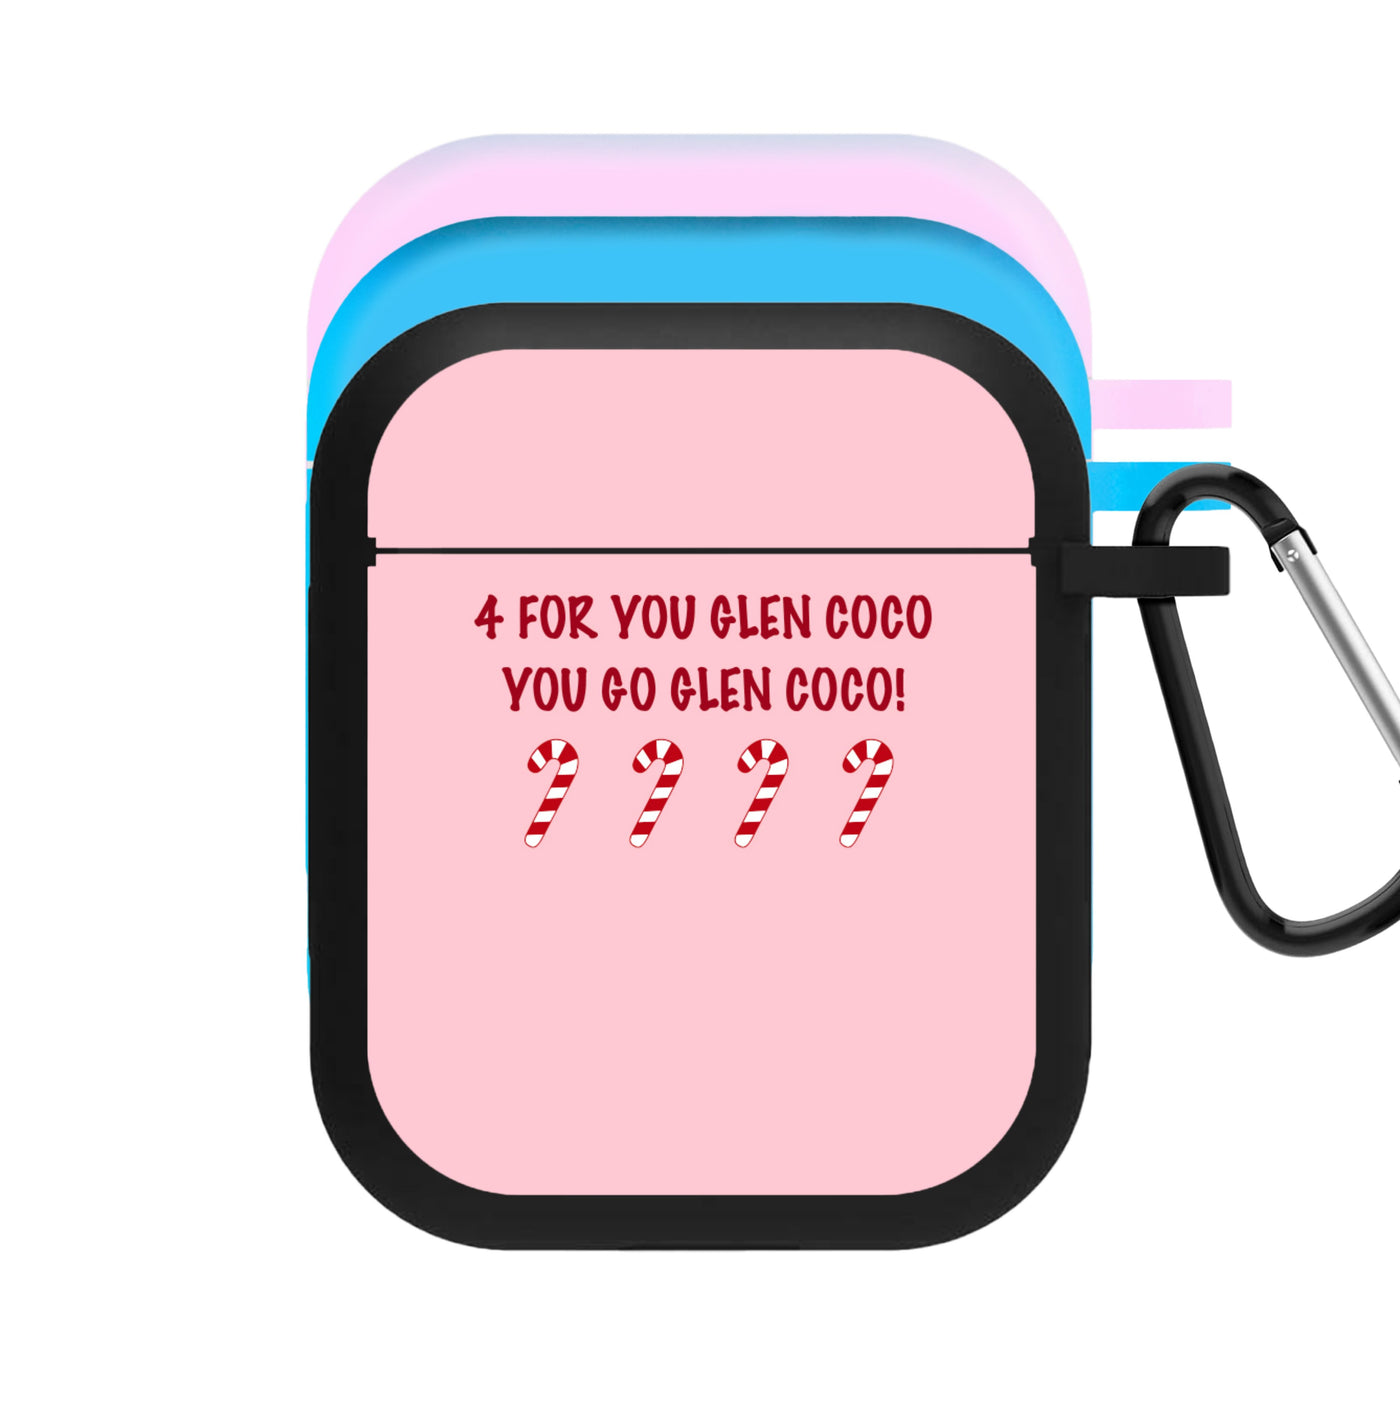 Four For You Glen Coco - Mean Girls AirPods Case